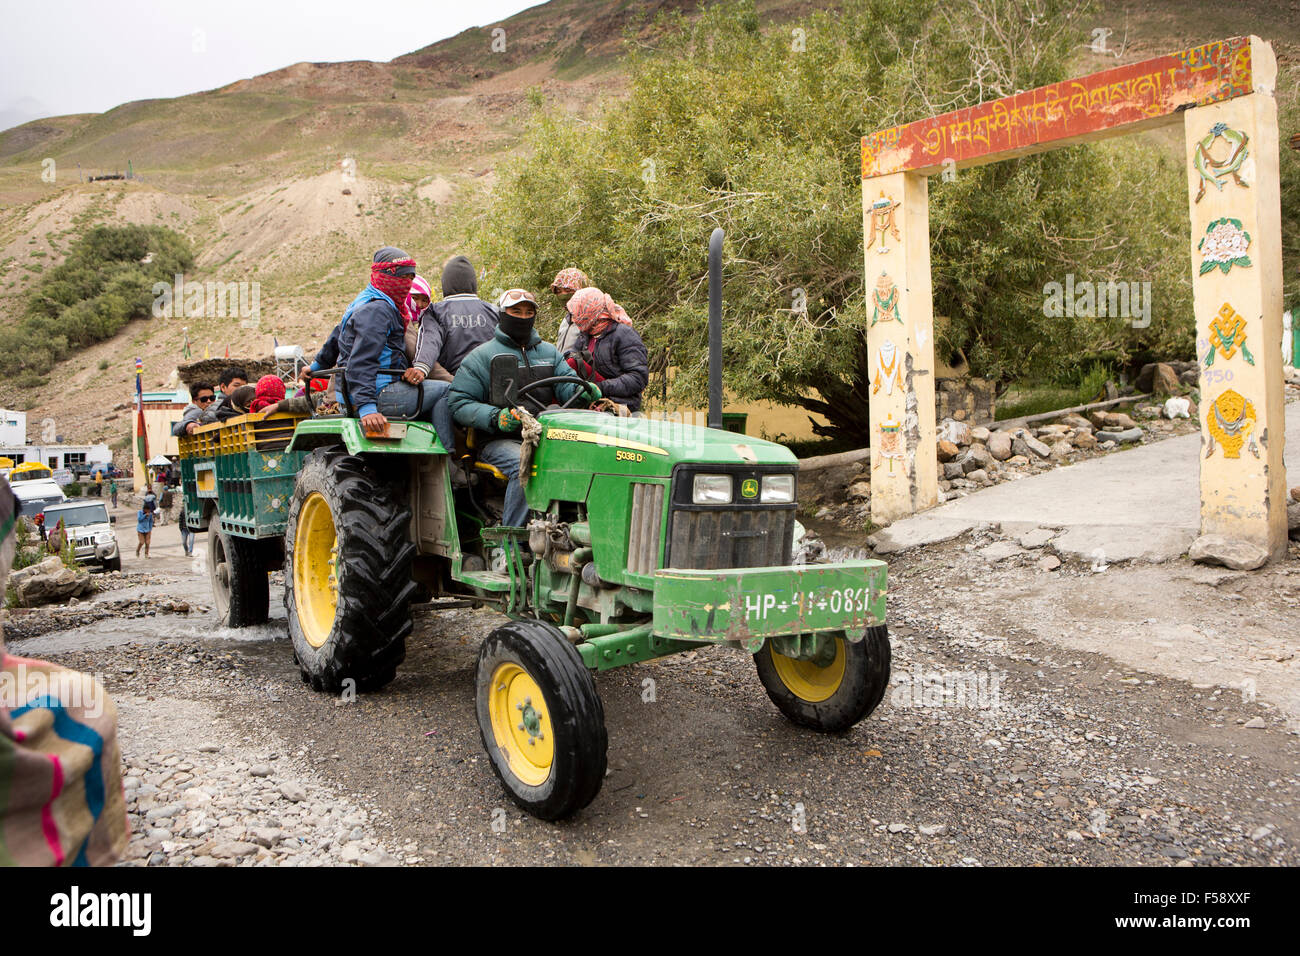 India, Himachal Pradesh, Spiti Valley, Losar village, group of people travelling to fields in John Deere tractor trailer Stock Photo